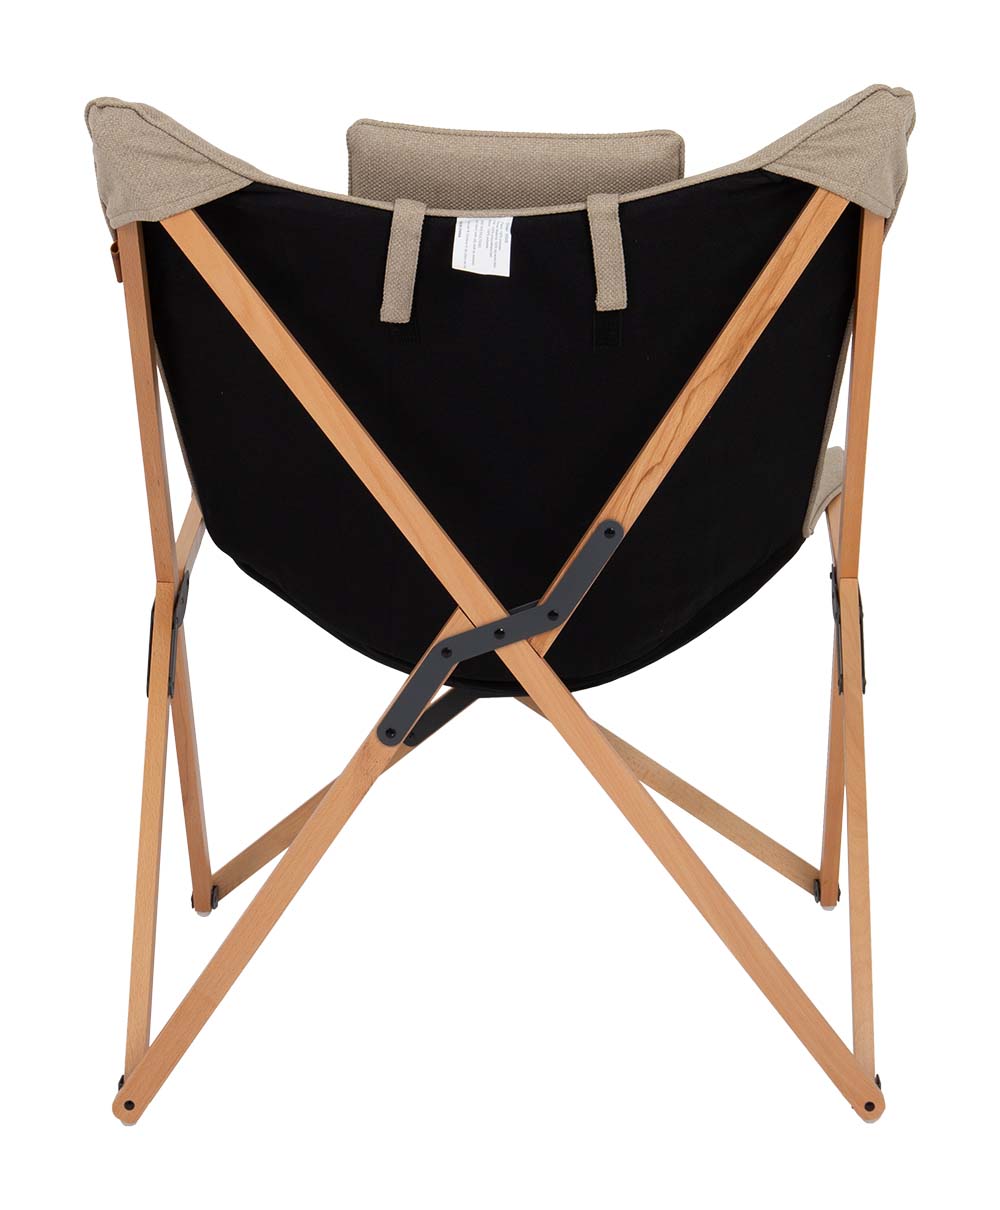 Bo-Camp - Urban Outdoor collection - Relaxstoel - Wembley - L - Nika - Beige detail 6